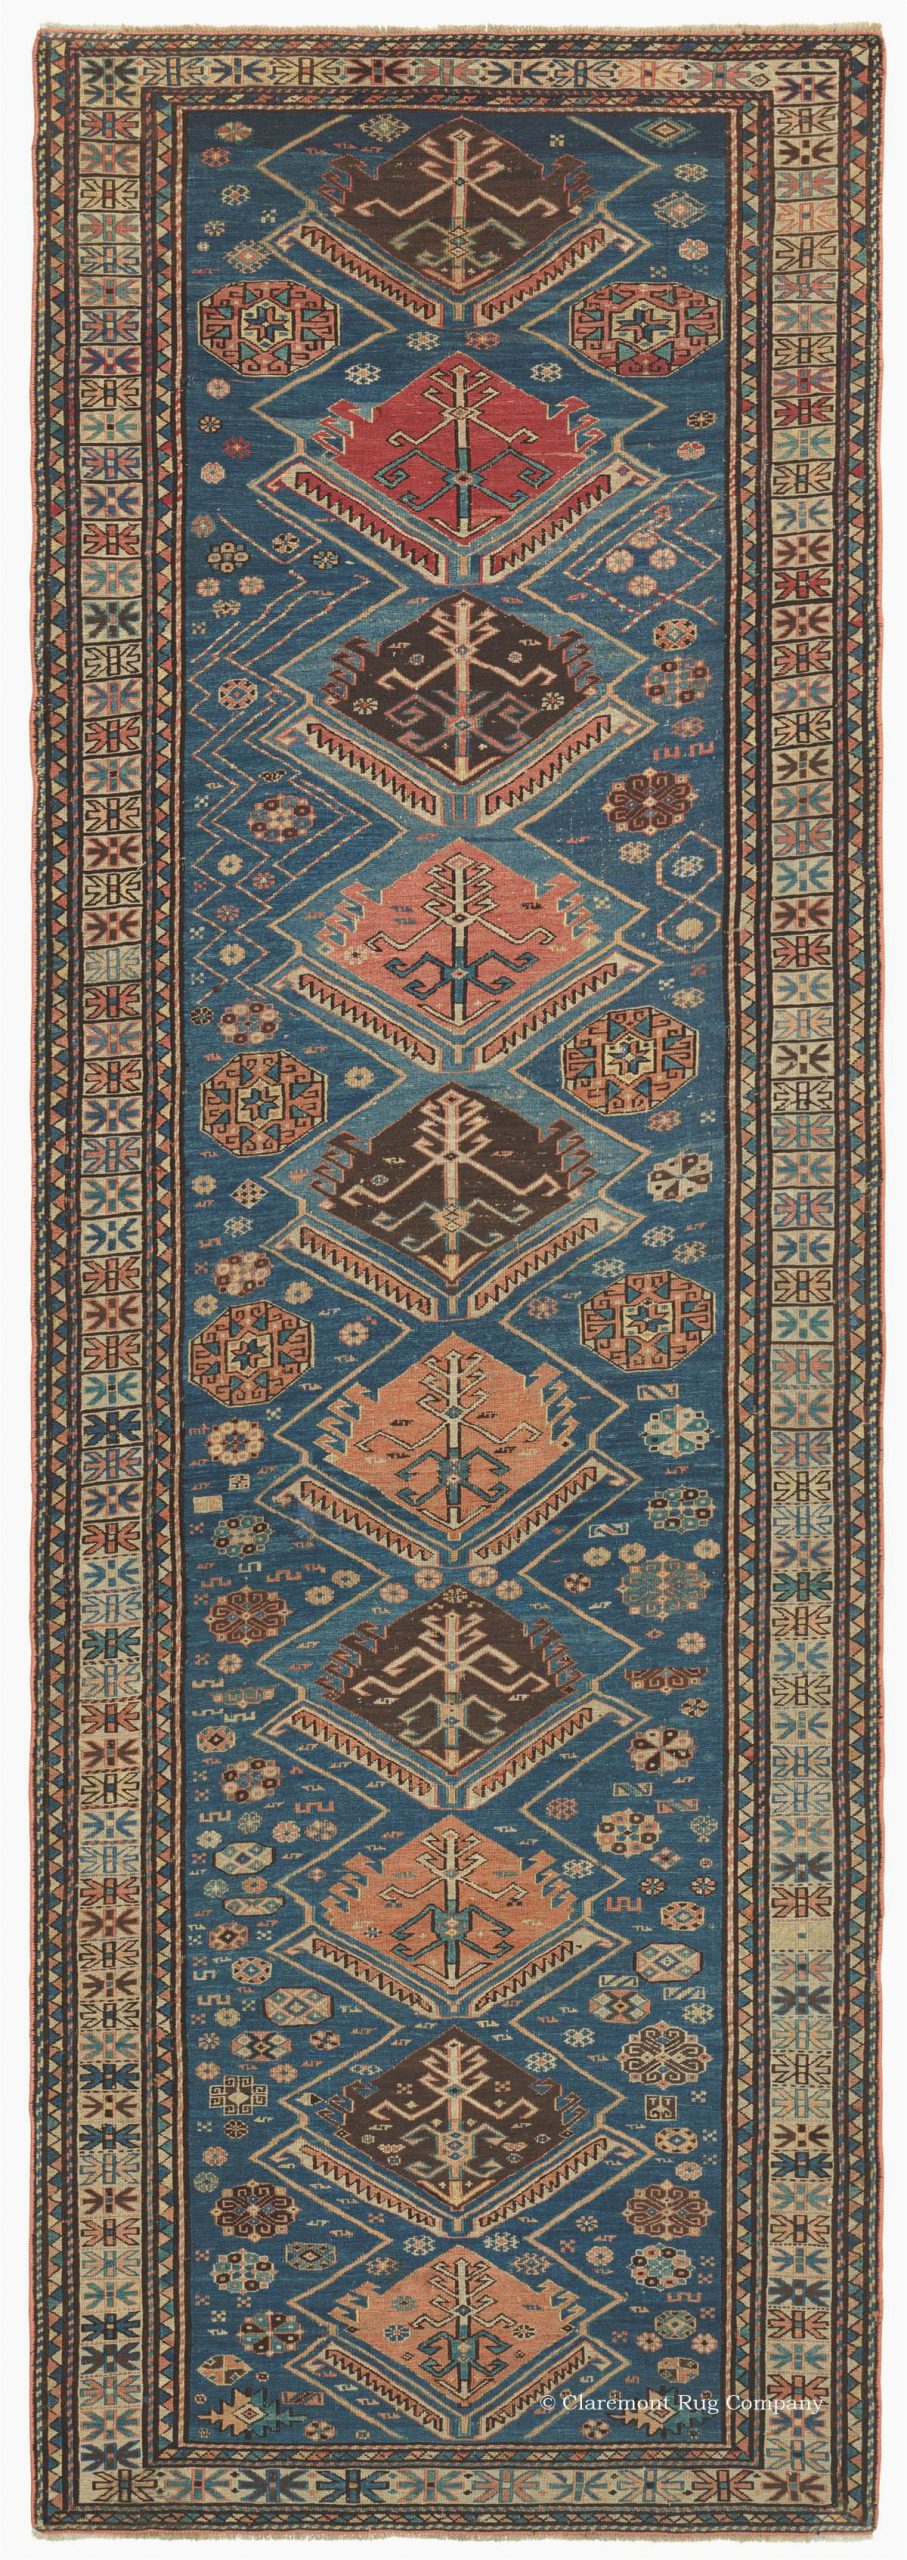 6ft X 10ft area Rug Caucasian soumac 3ft 6in X 10ft 3in Circa 1875 Instead Of